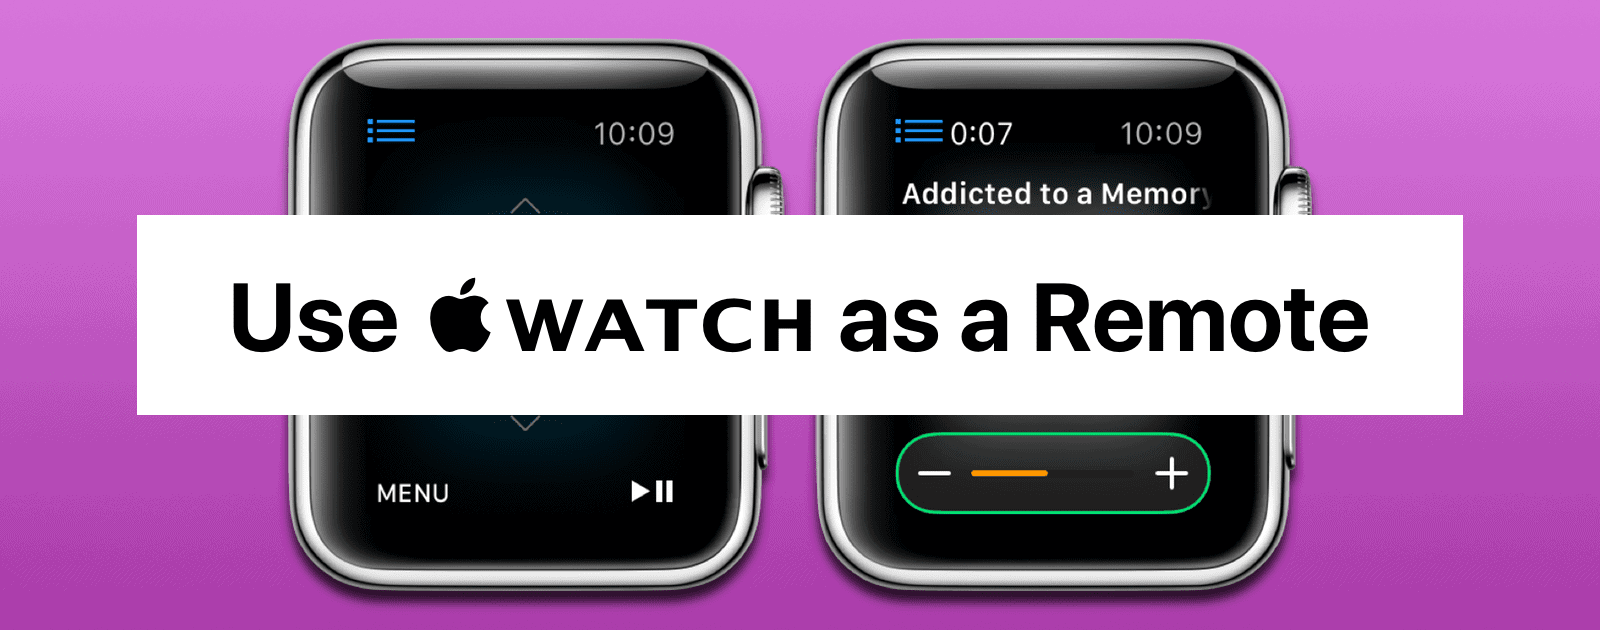 watchOS: Use your Apple Watch as an Apple TV or iTunes Remote